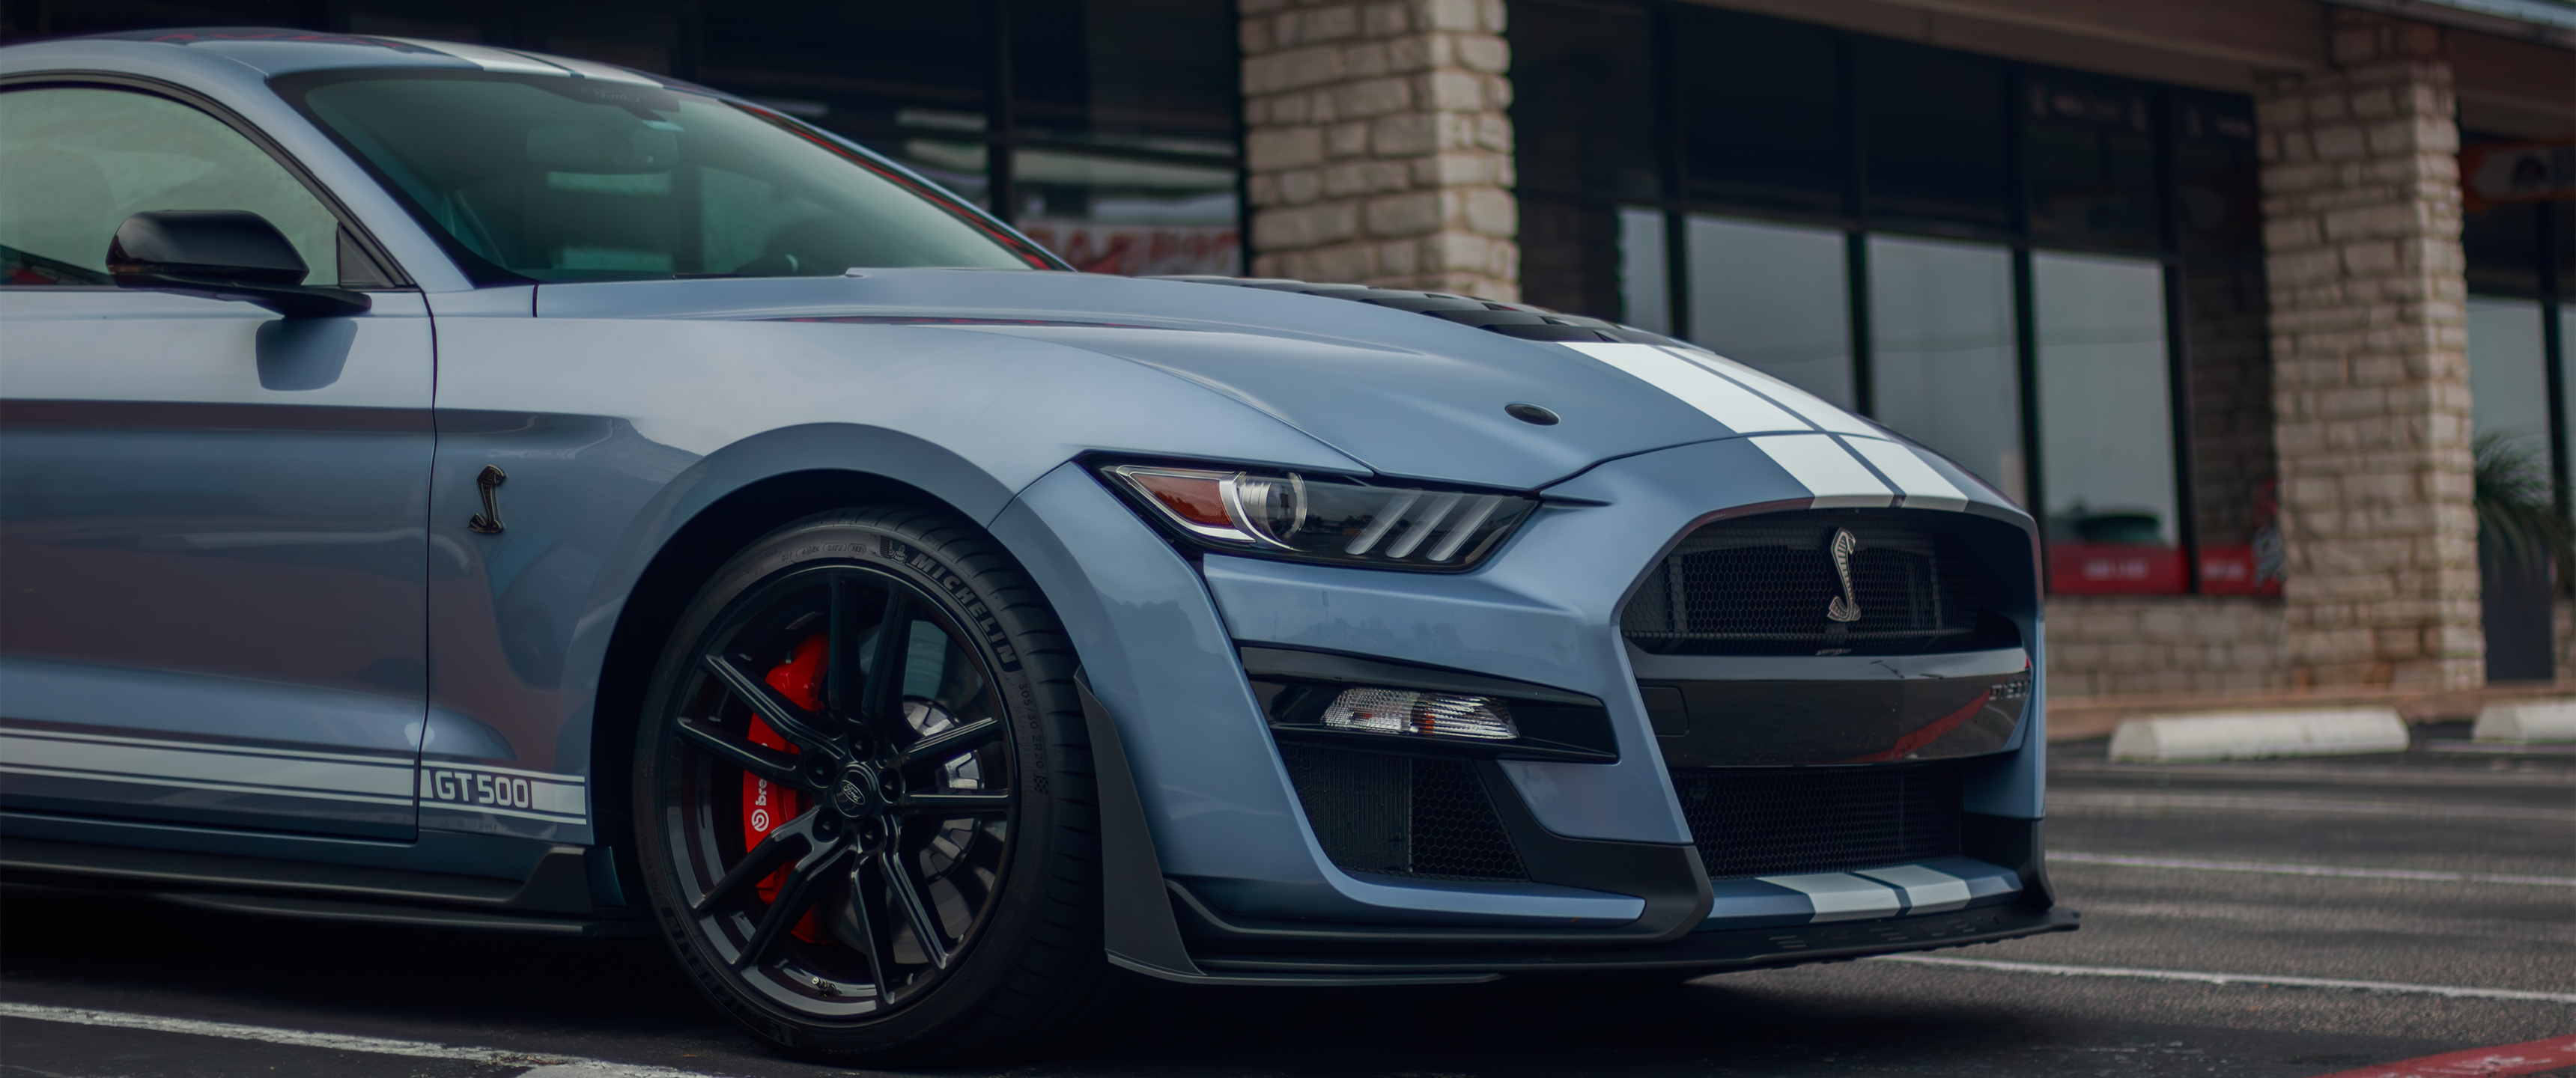 Car Ford Mustang Ford Mustang Shelby Mustang Dark Horse 3440x1440